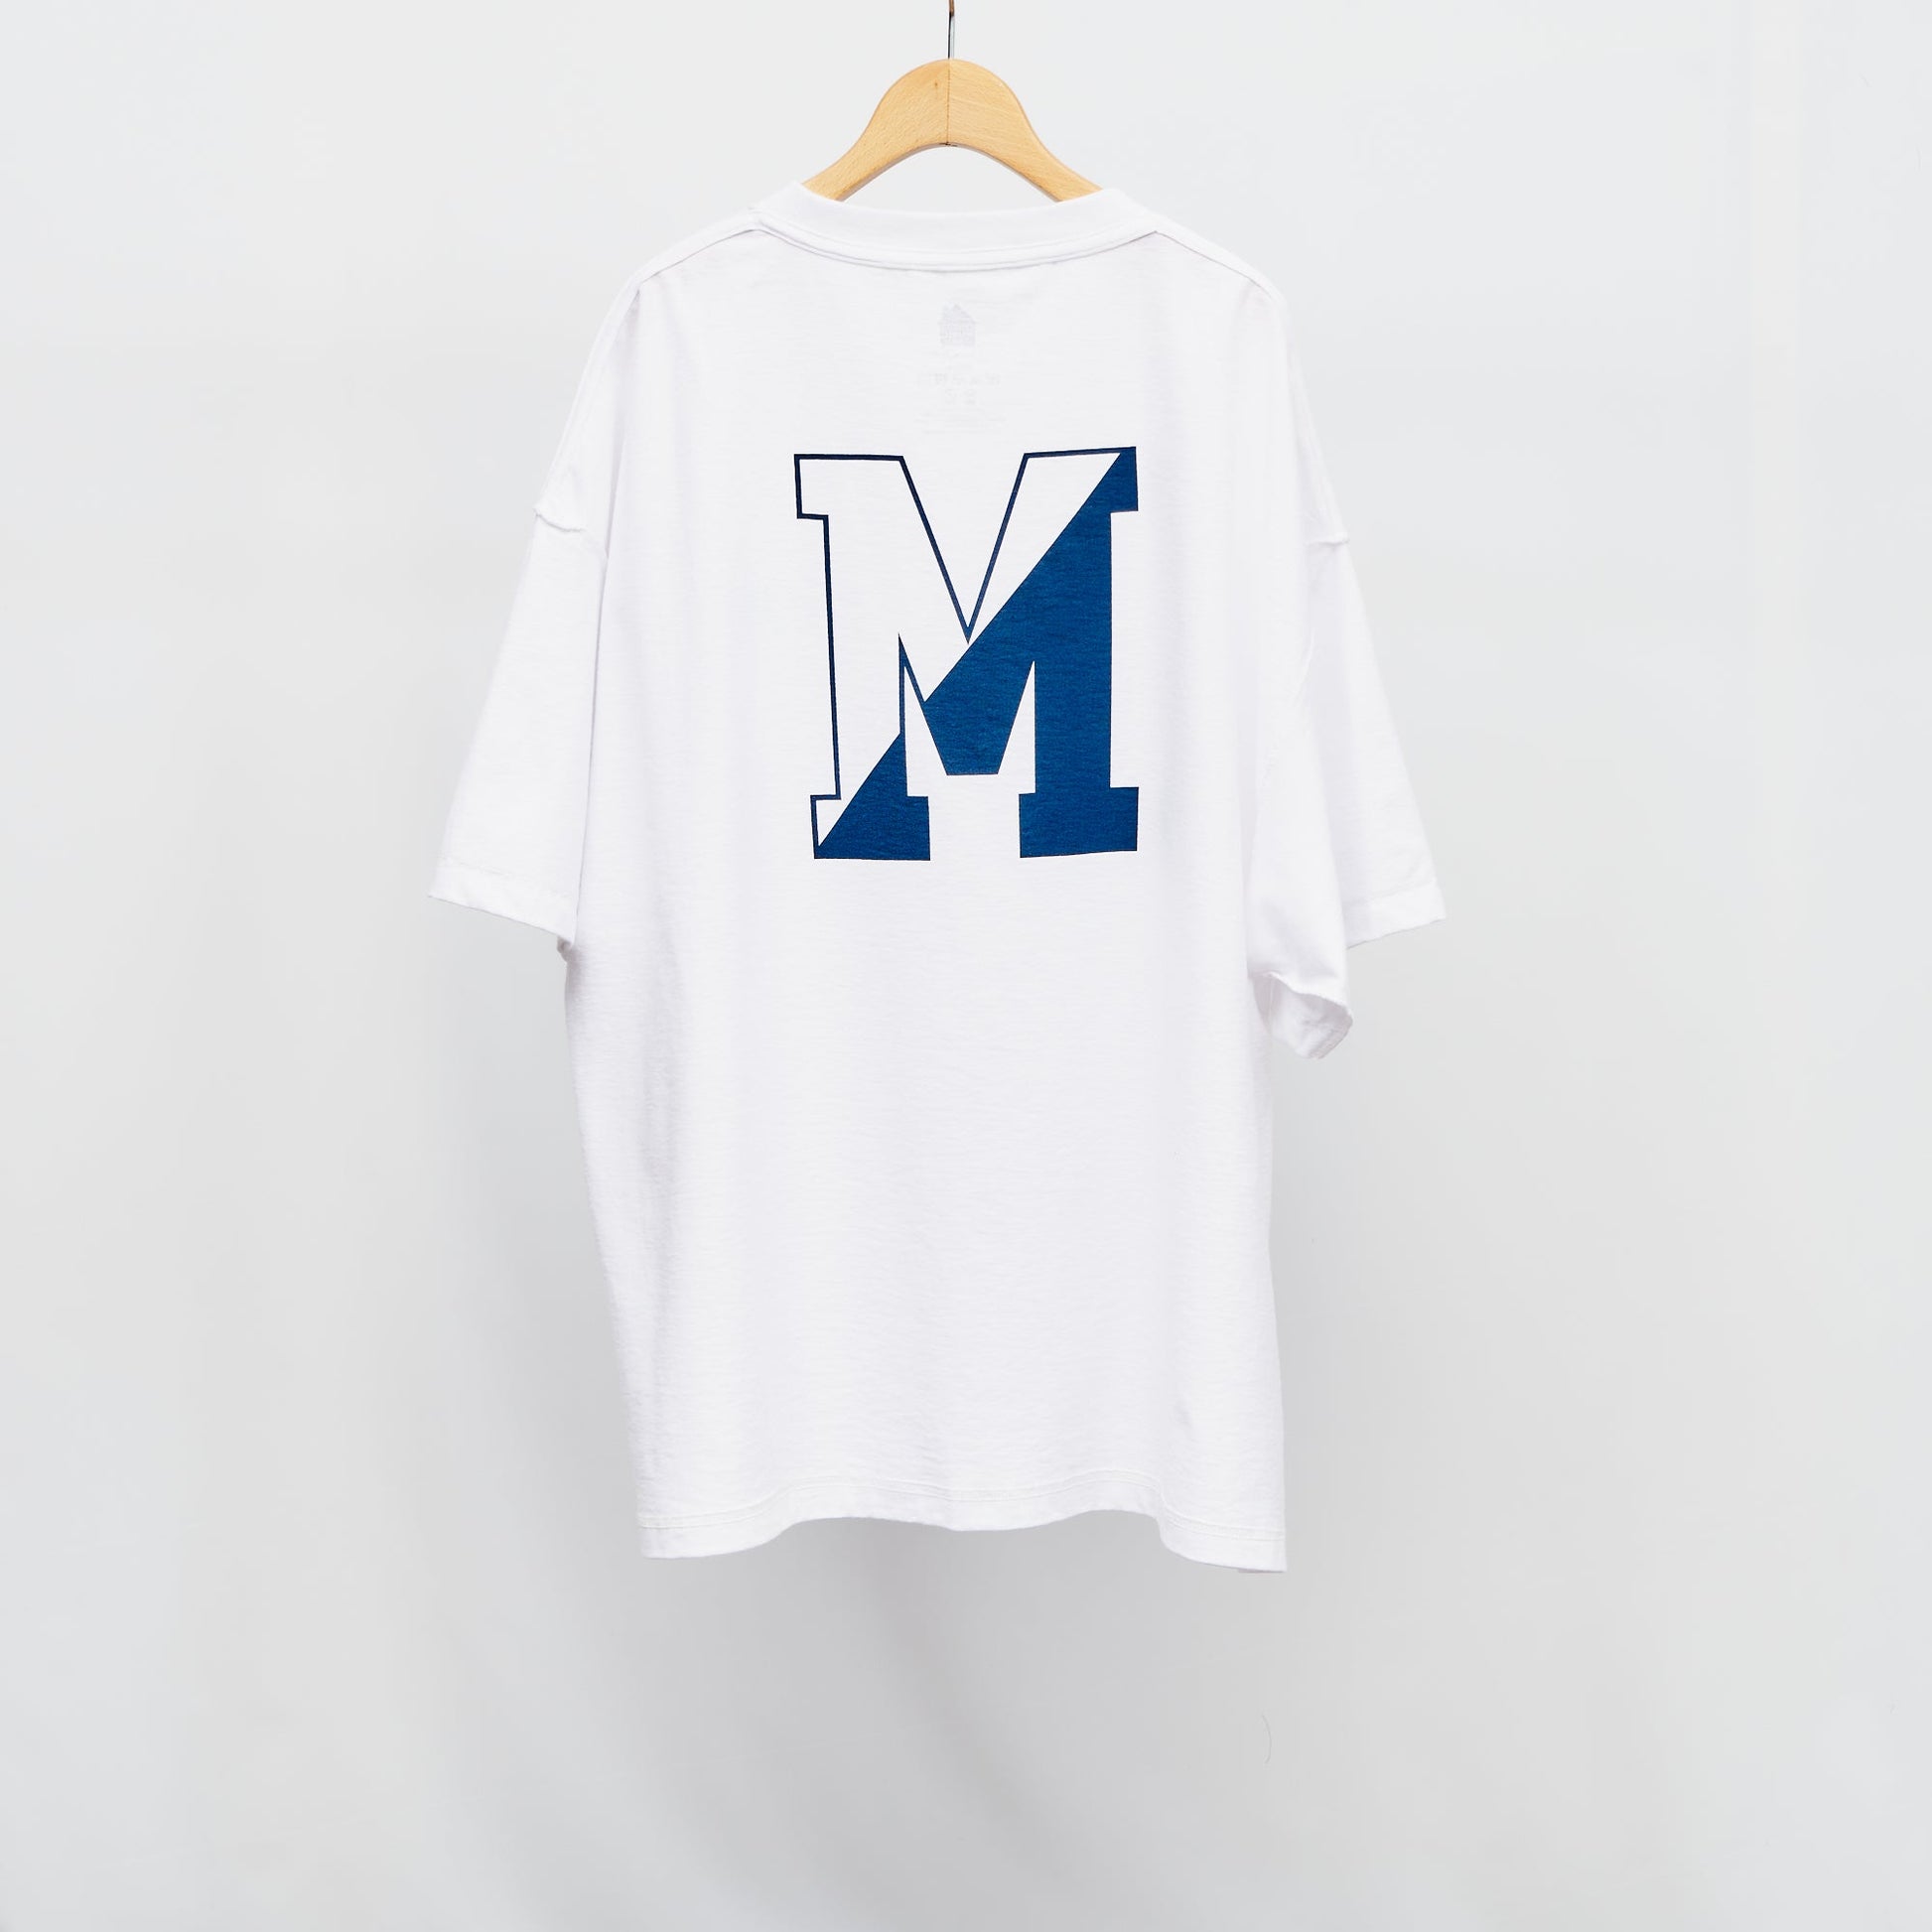 MEDITATION  S/S T-SHIRTS is-ness online shop 3